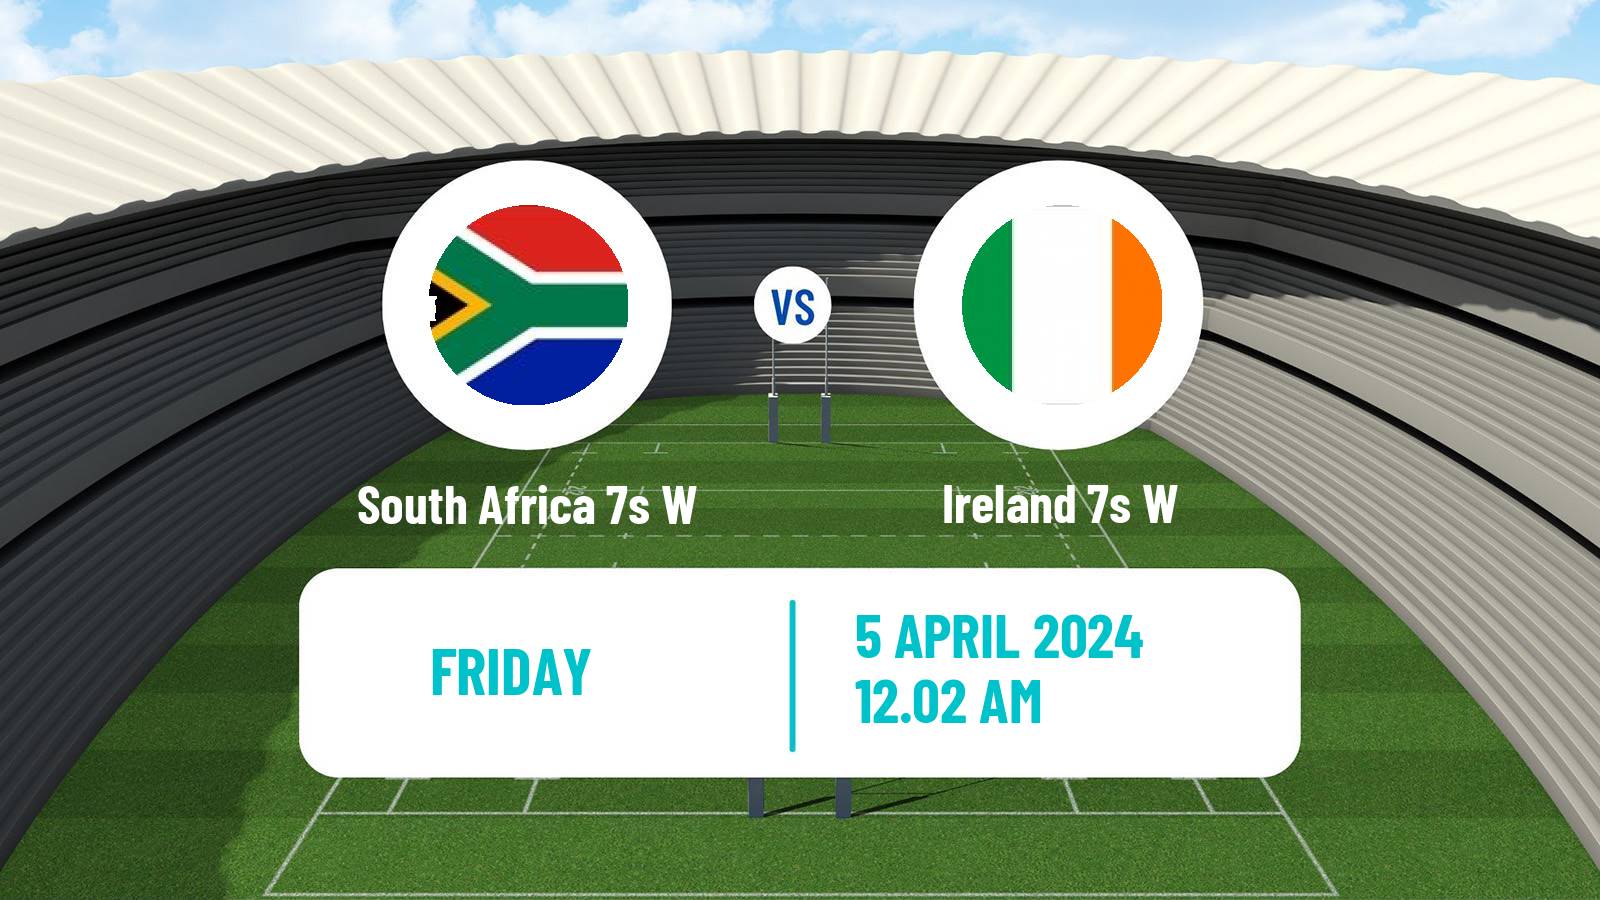 Rugby union Sevens World Series Women - Hong Kong South Africa 7s W - Ireland 7s W